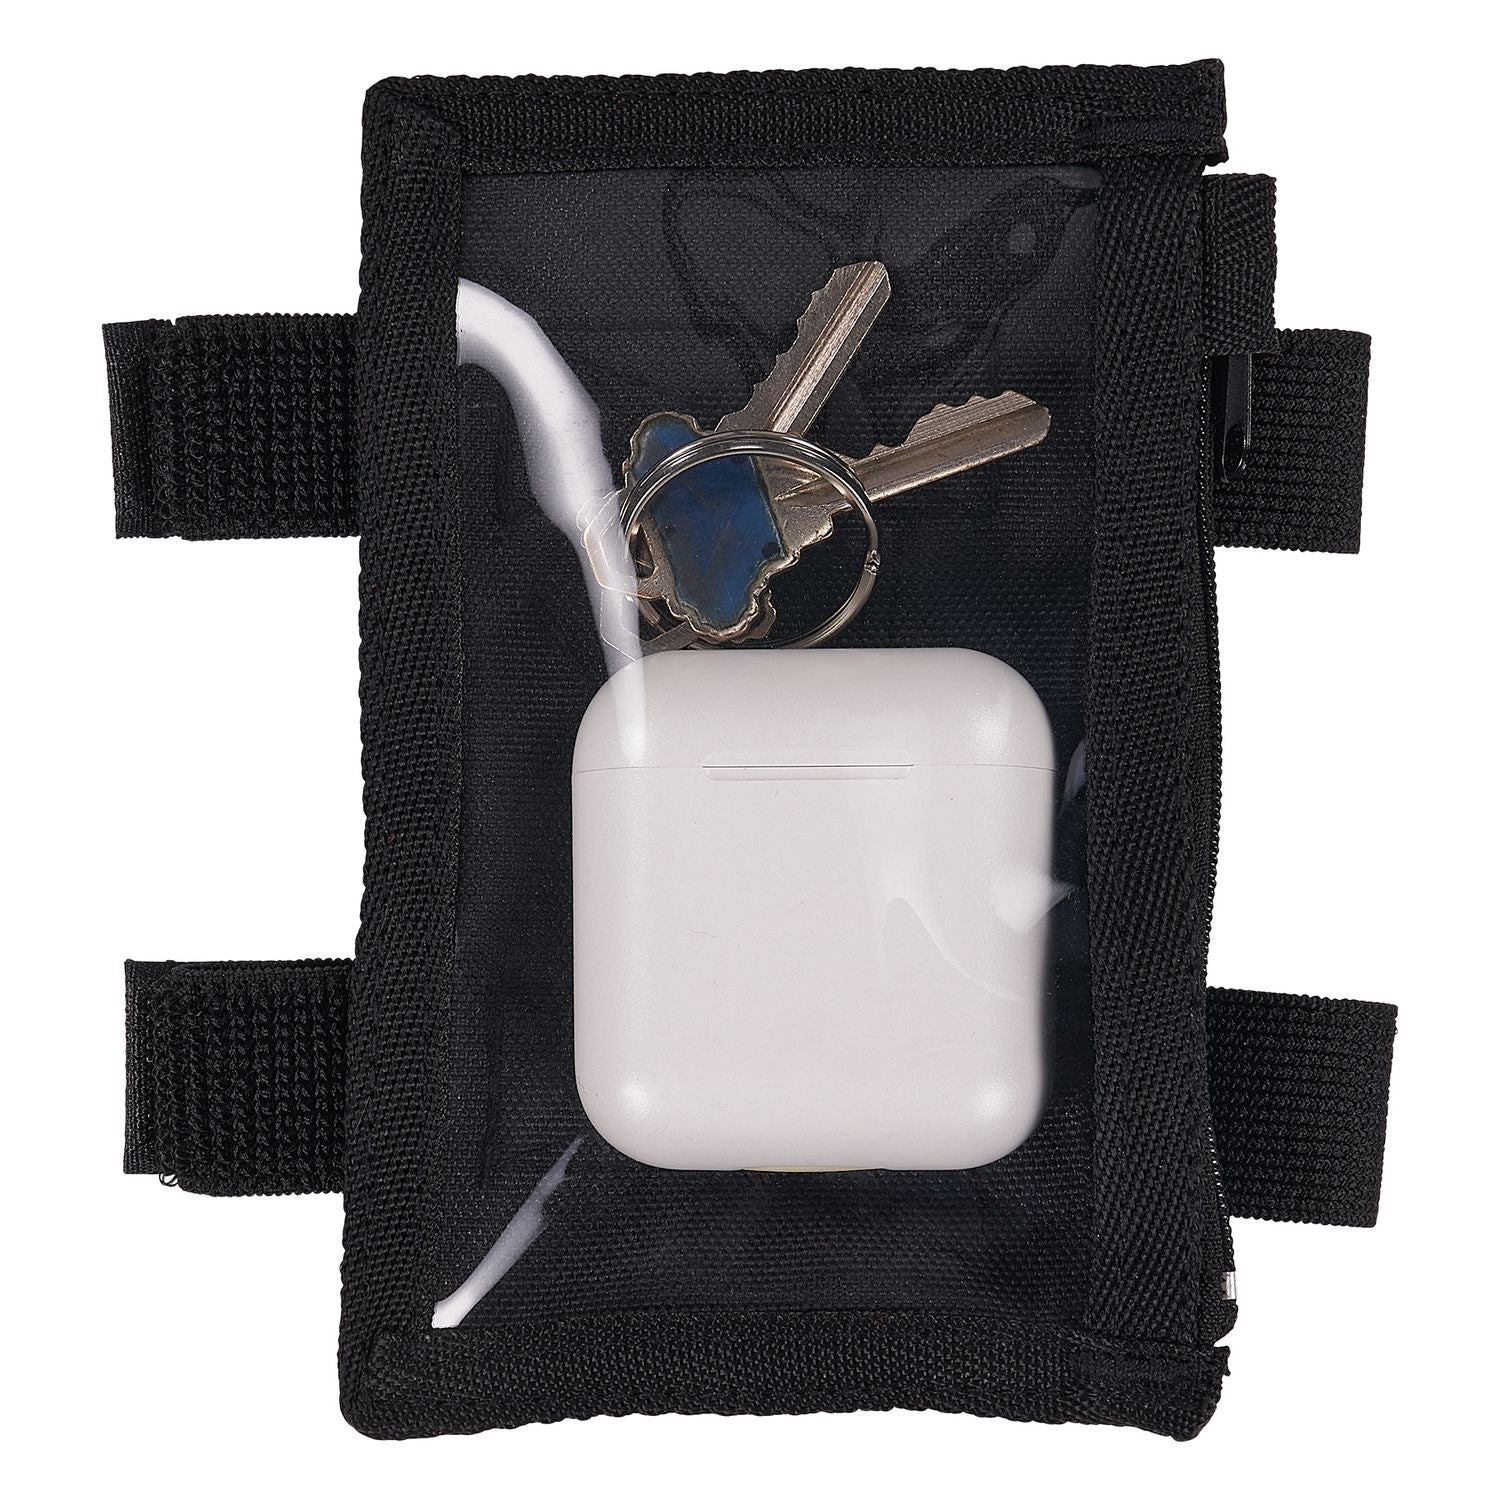 squids-3387-dual-band-arm-id-badge-holder-w-zipper-vertical-black-375-x-575-for-275-x-475-insert-ships-in-1-3-bus-days_ego19959 - 2